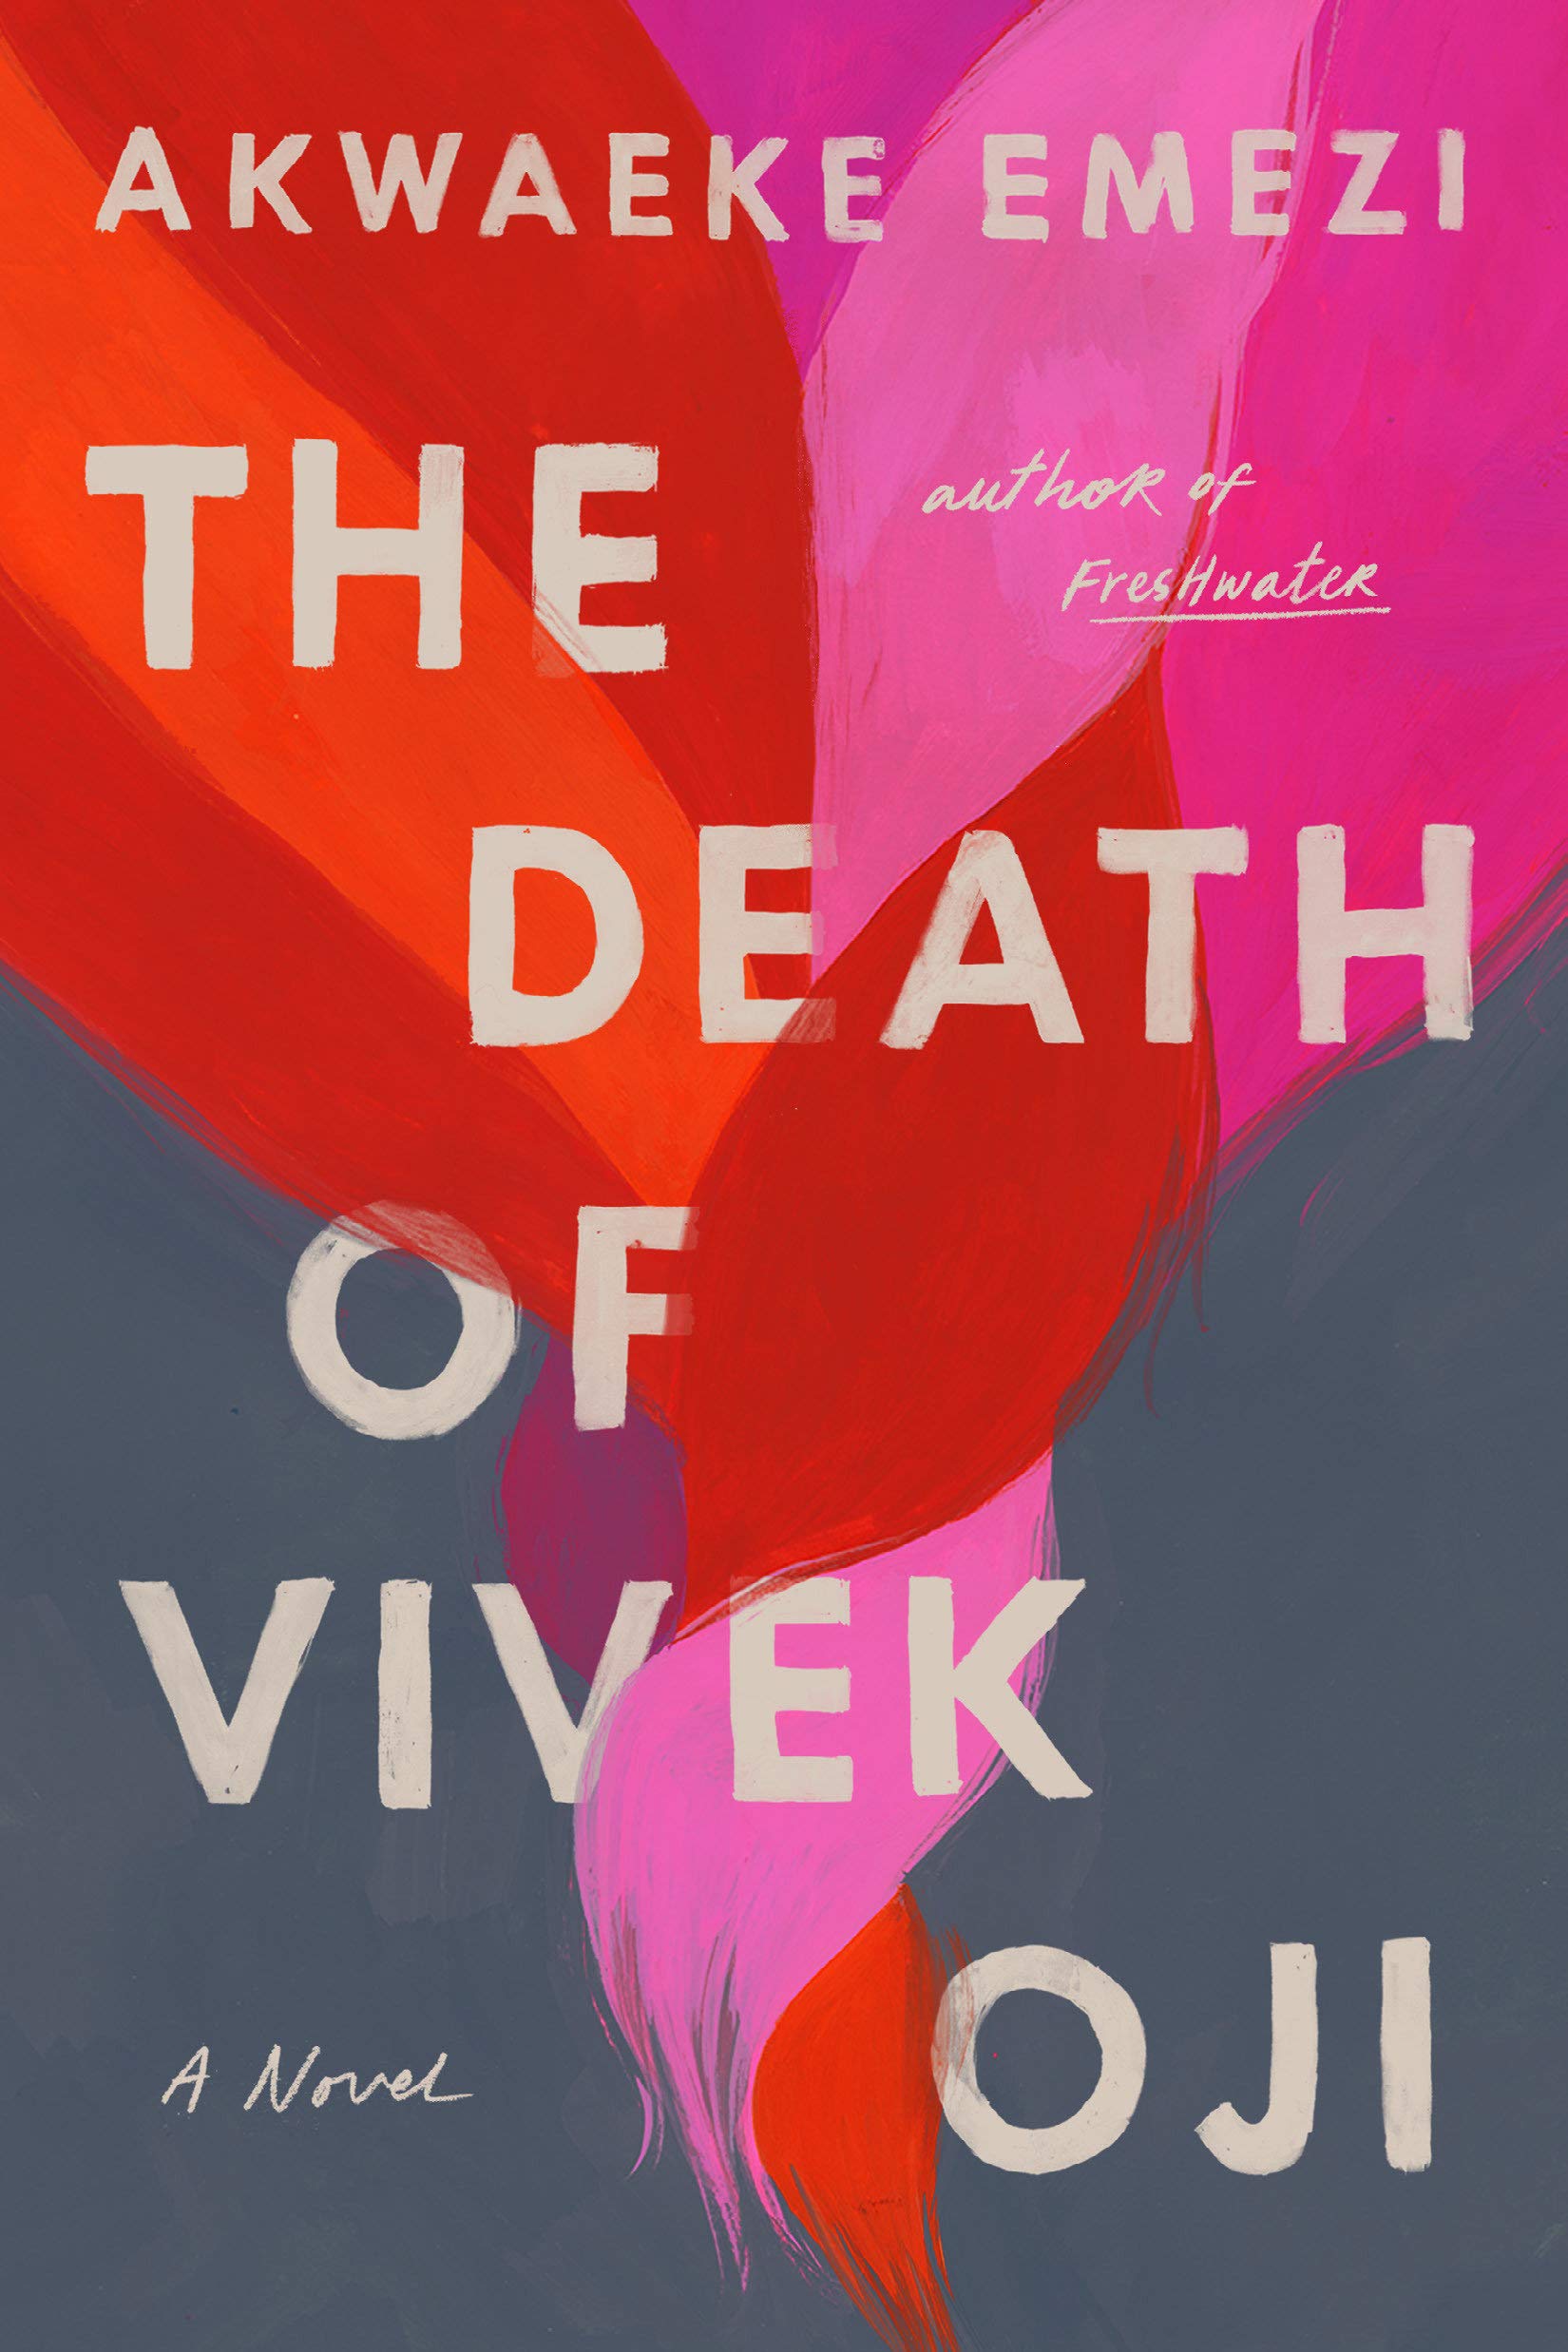 The cover of The Death of Vivek Oji